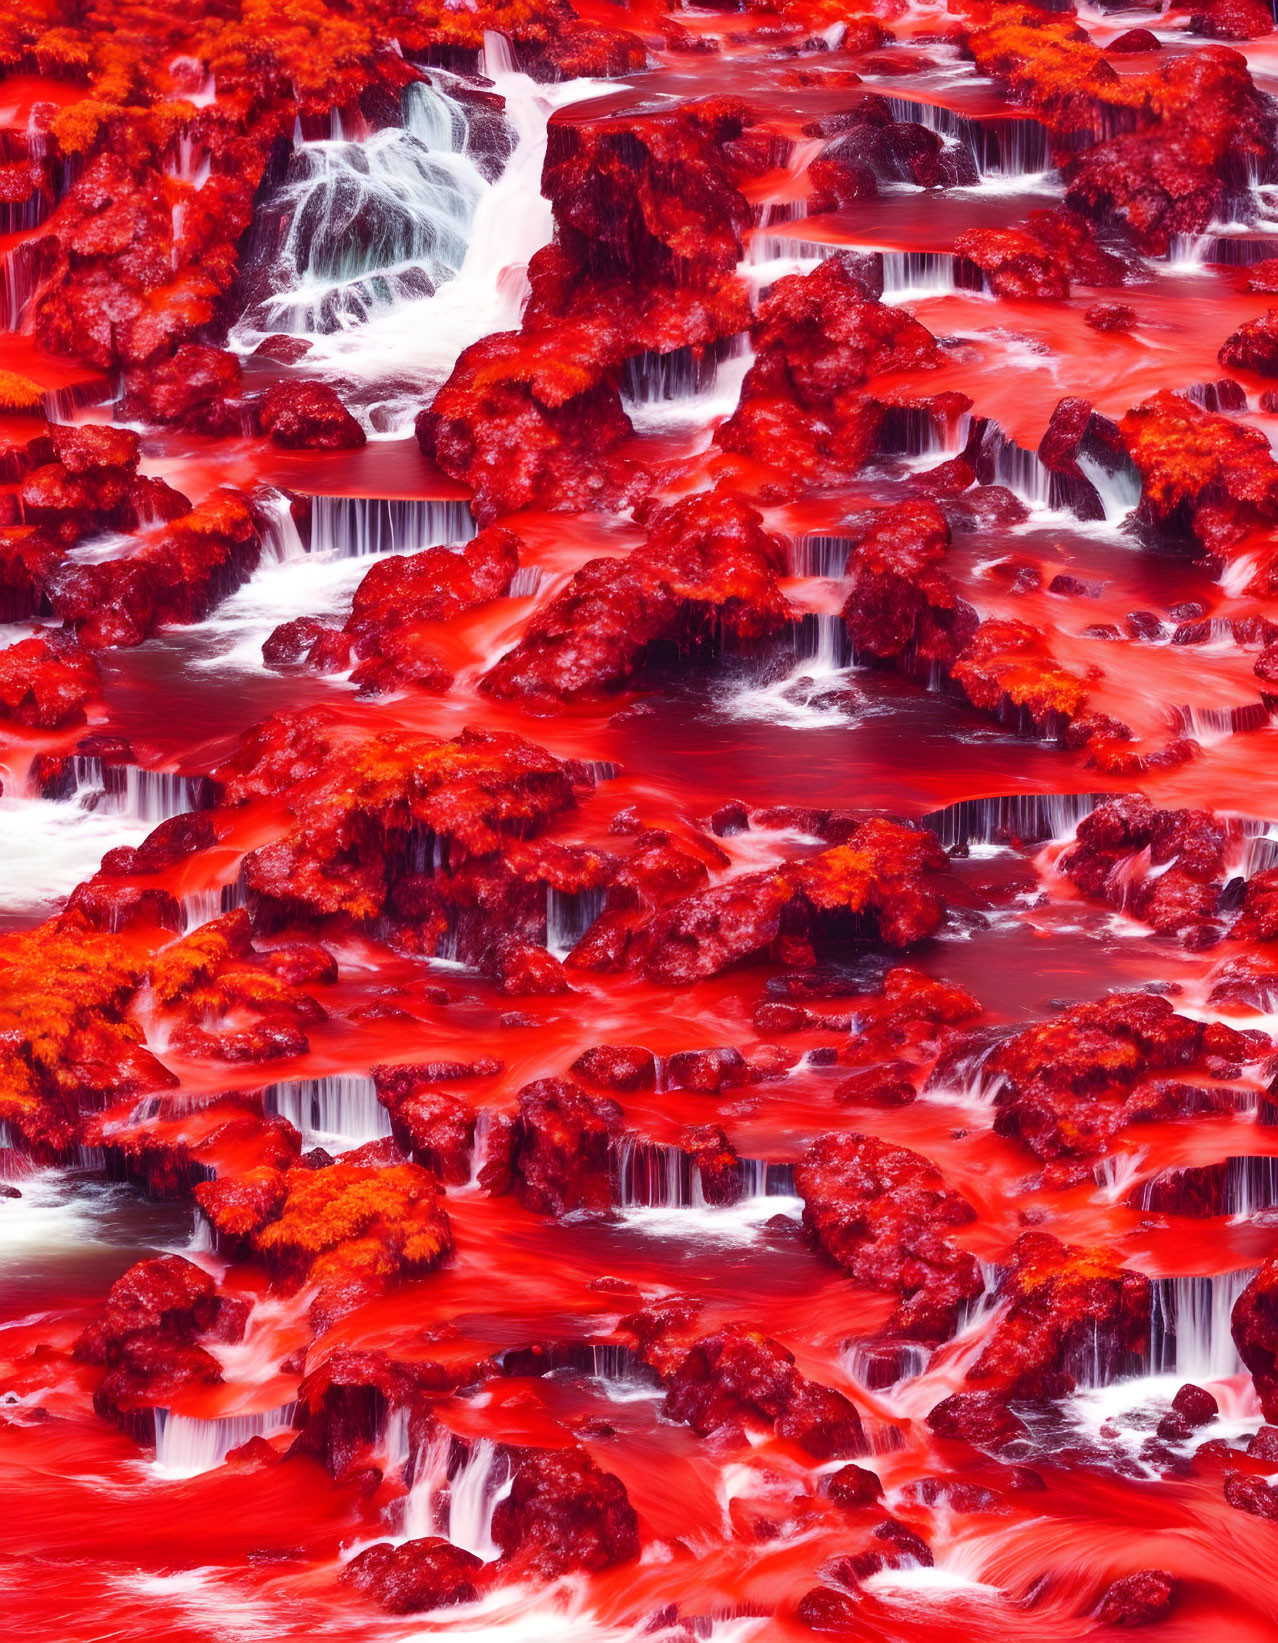 Digitally-altered surreal image: cascading waterfalls, vibrant red foliage, fiery landscape